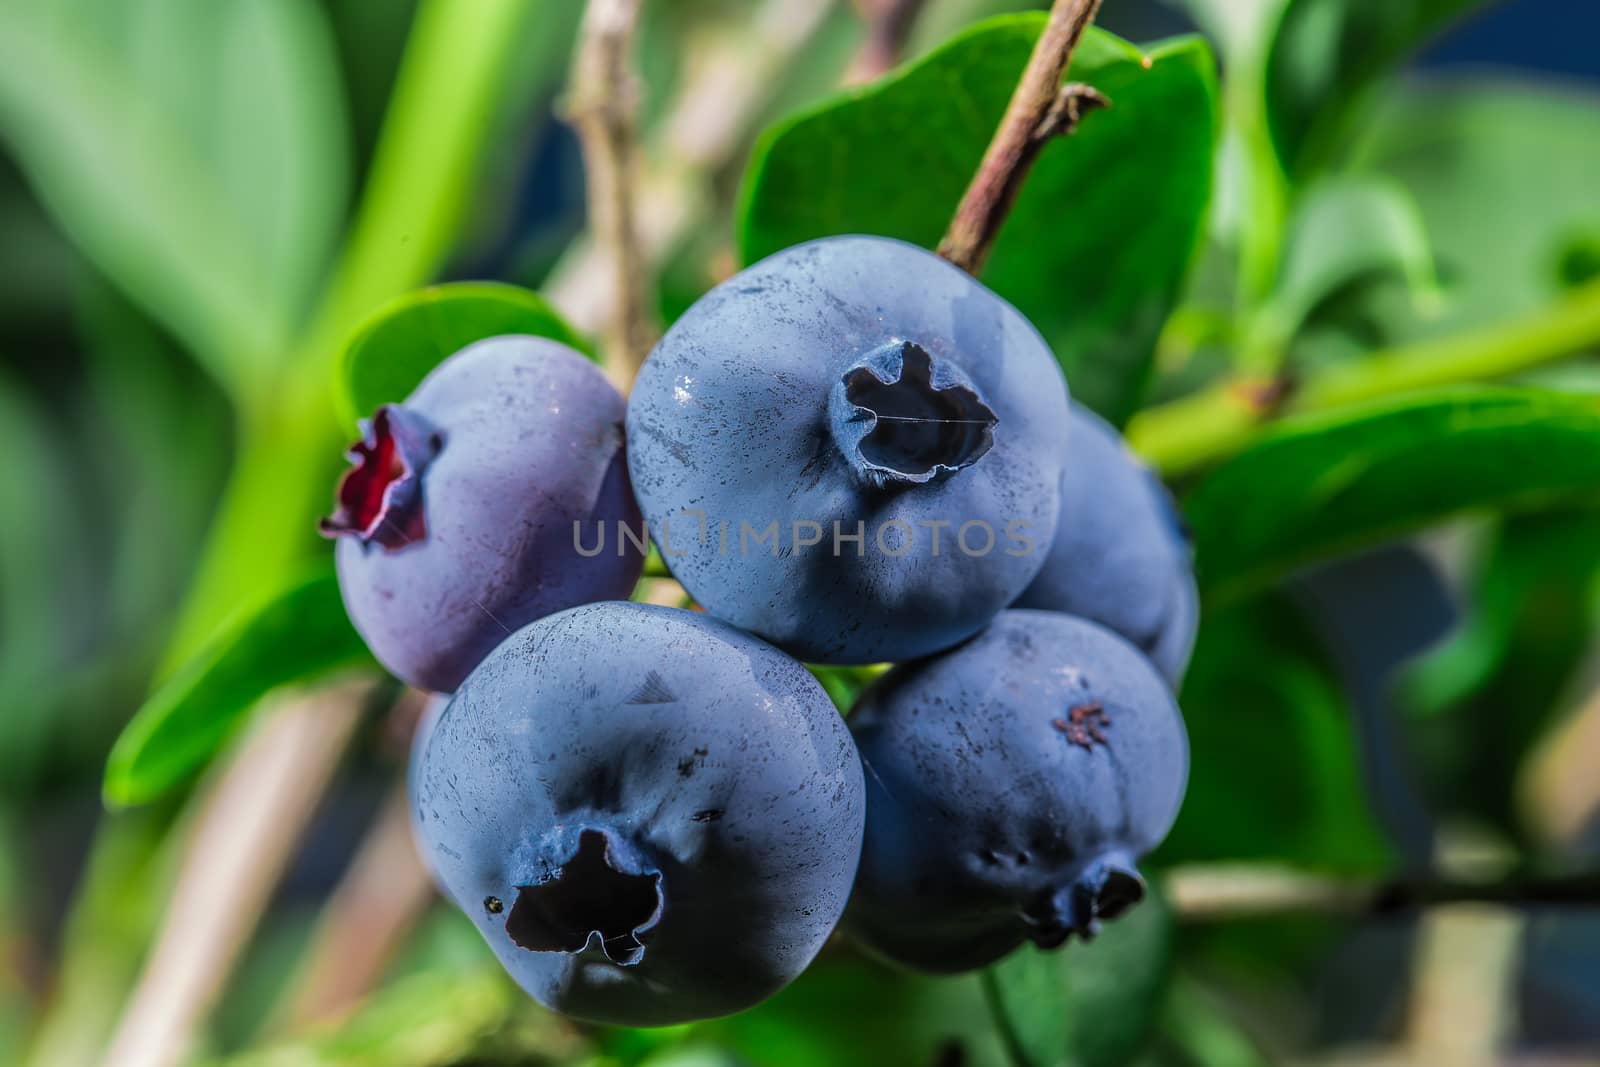 A lot of big juicy blueberries in the wild. Found in Ontario, Canada.